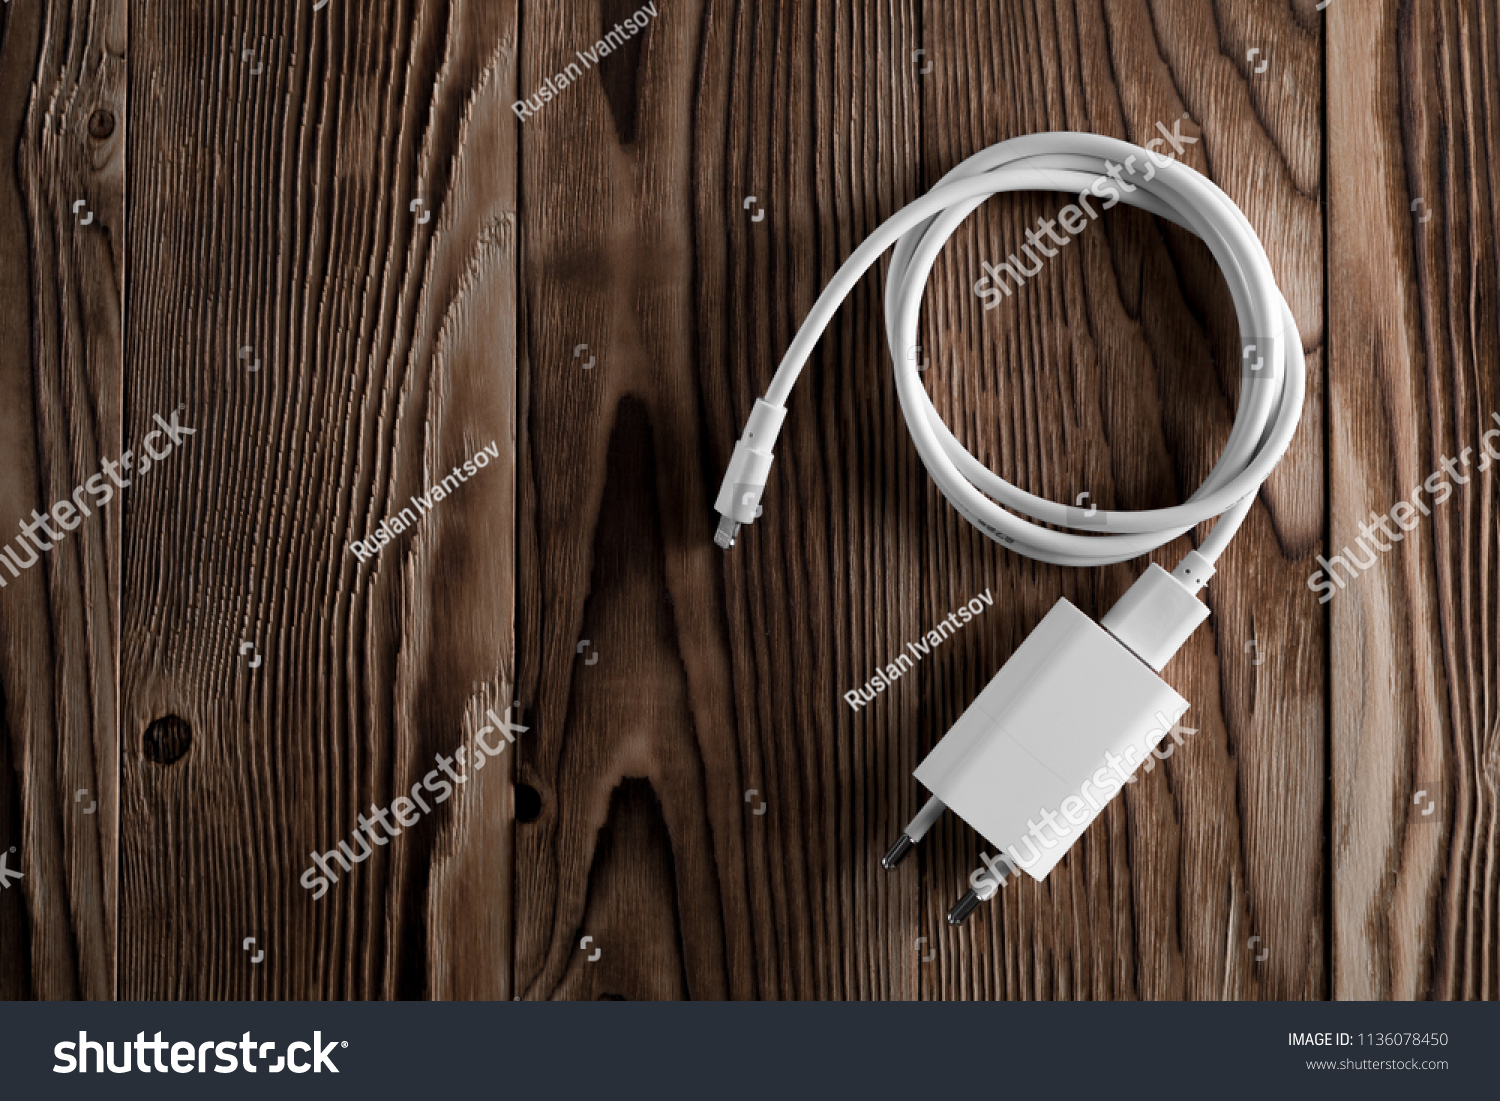 Cable phone chargers on wood background #1136078450